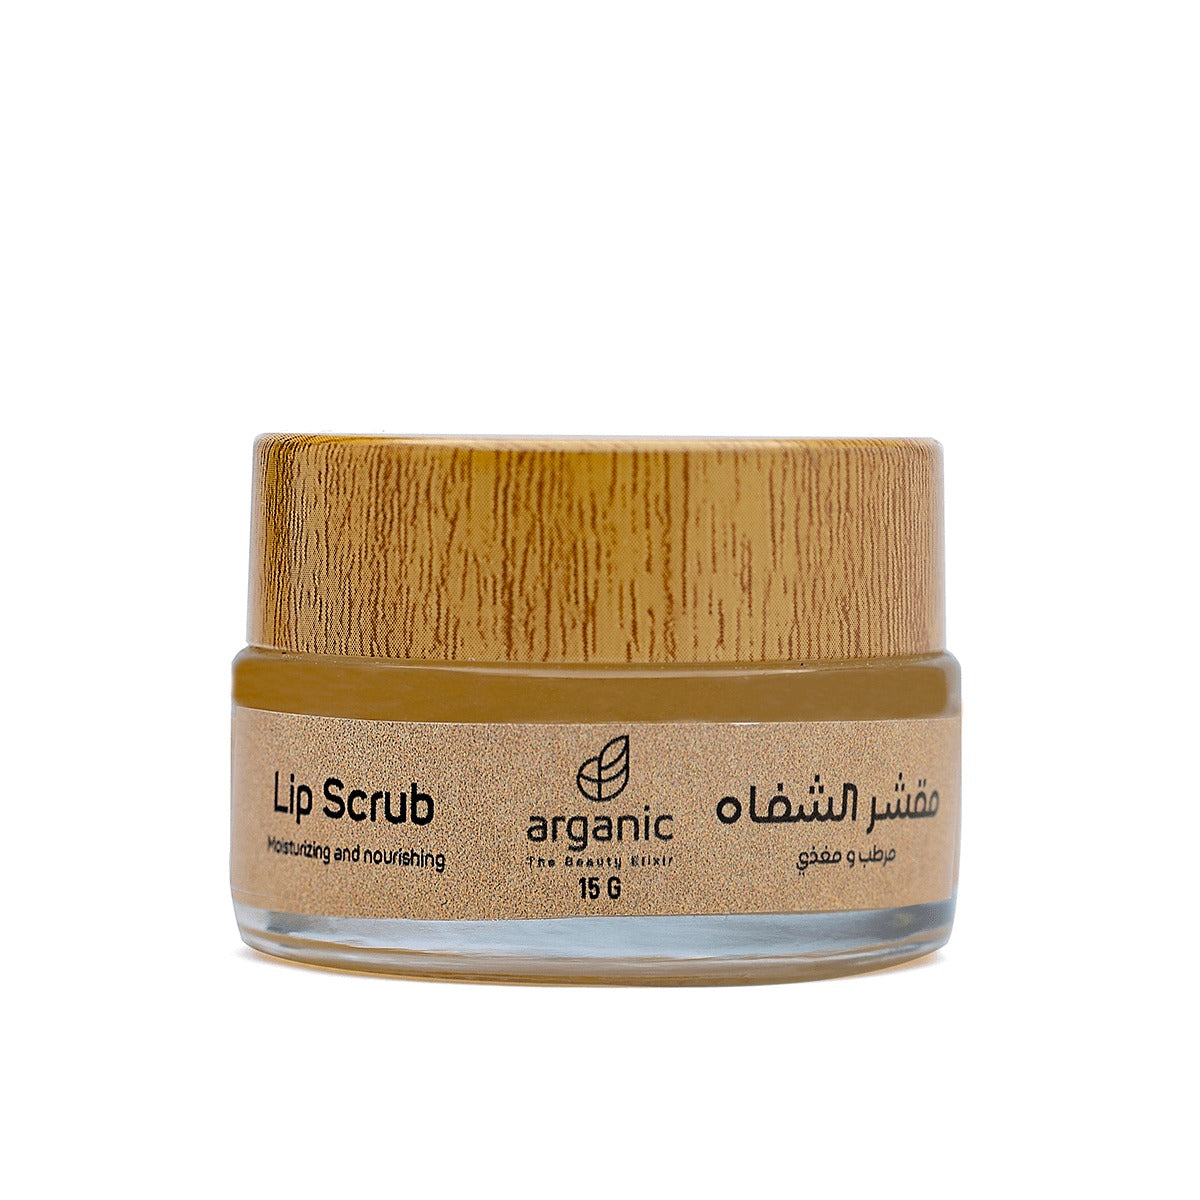 Lip scrub container by Arganic with wooden cap and clear label